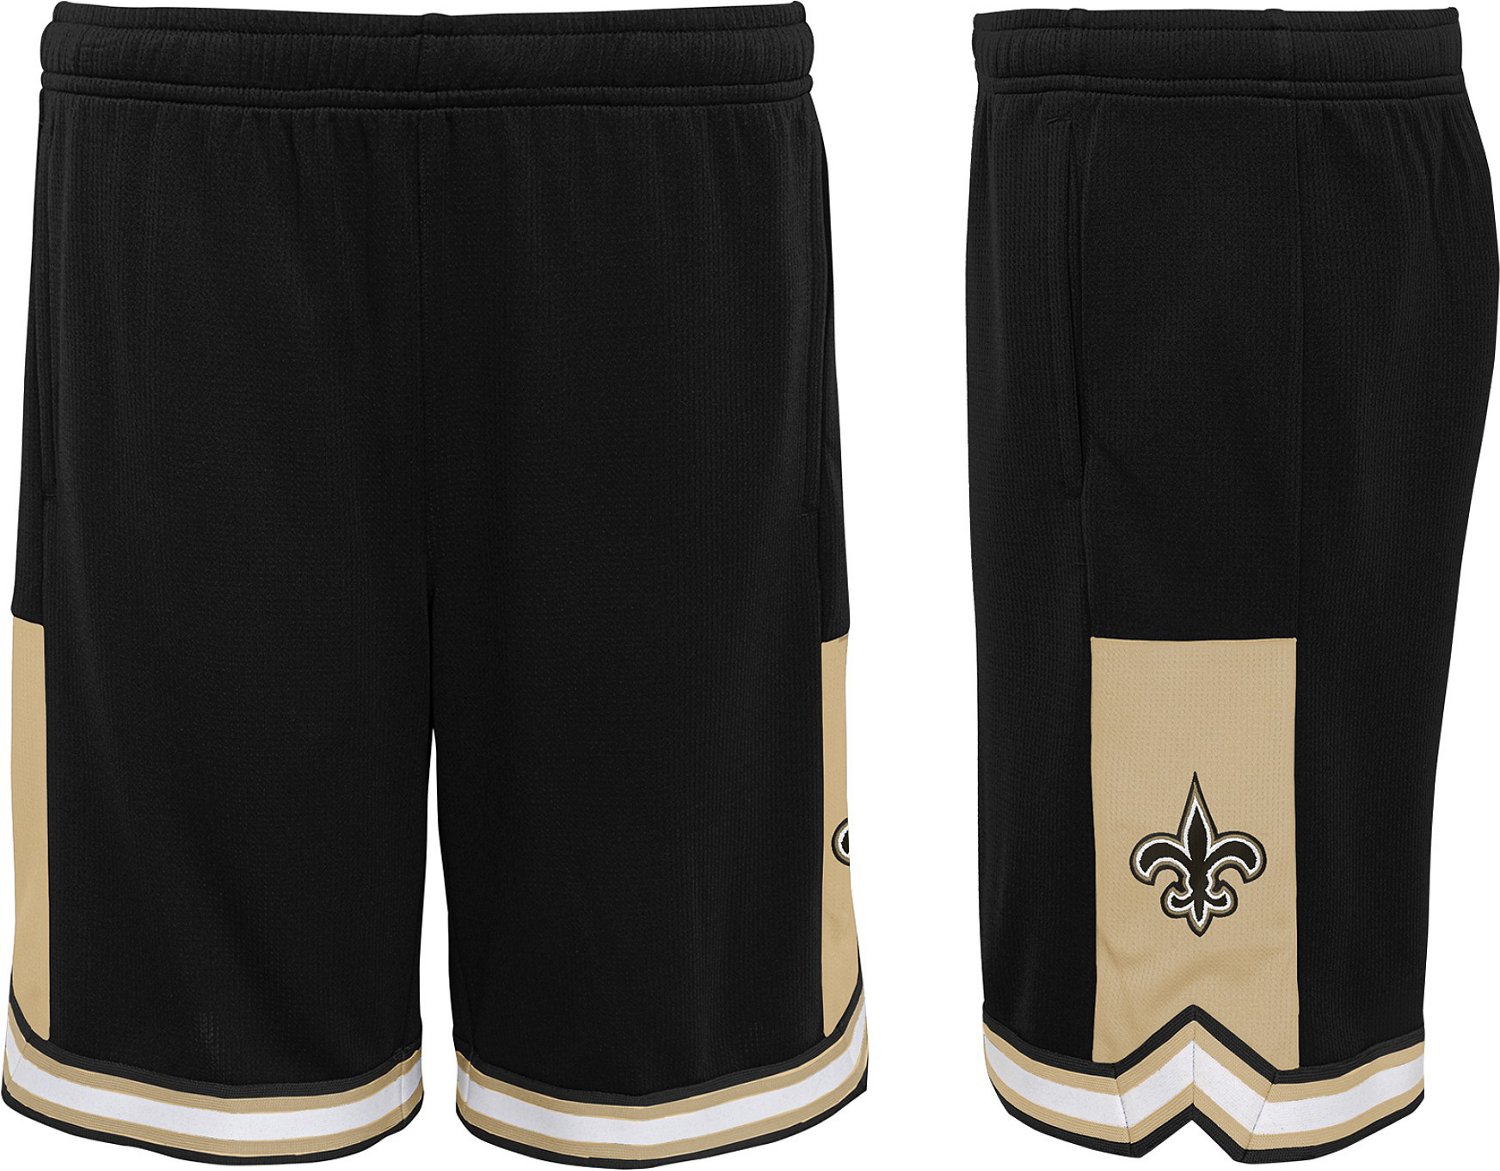 NFL Boys' New Orleans Saints Stated Mesh Shorts | Academy